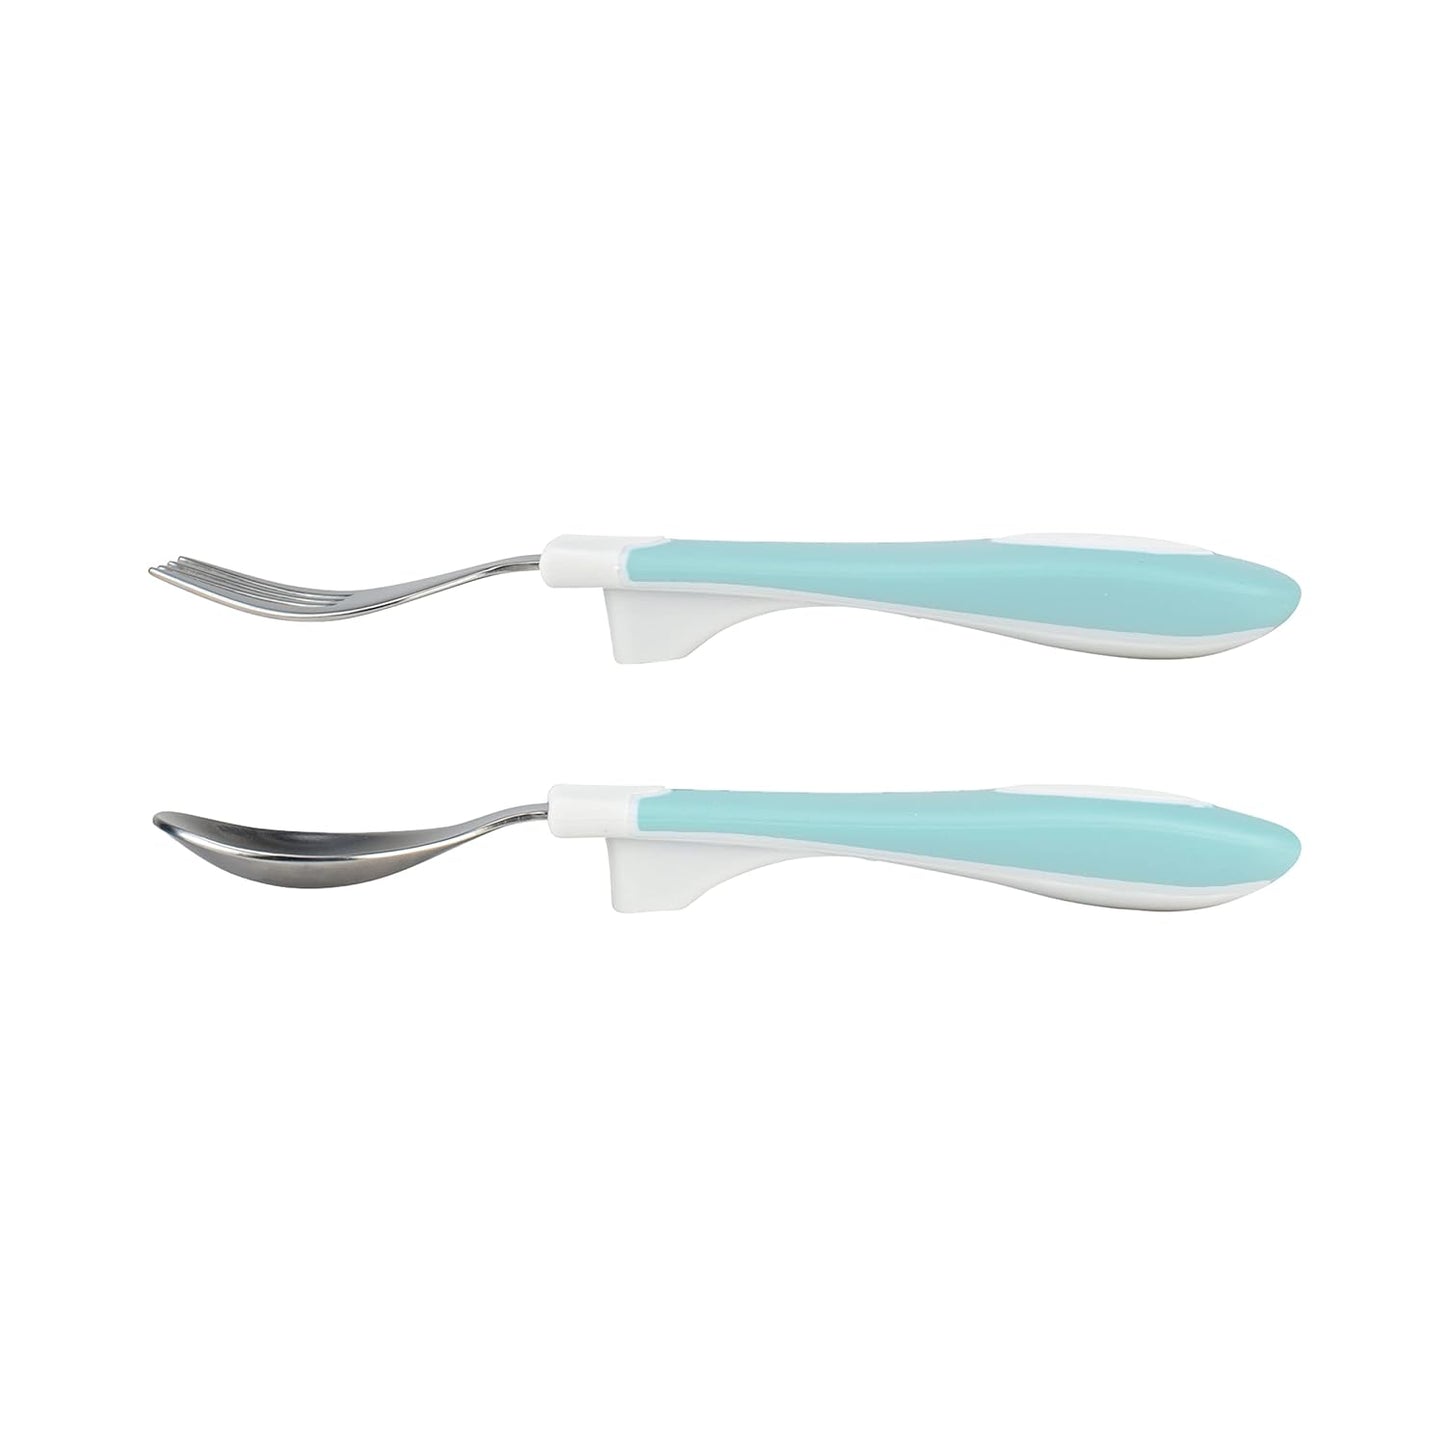 Dr. Brown’s Soft Grip Spoon And Fork Set, Blue